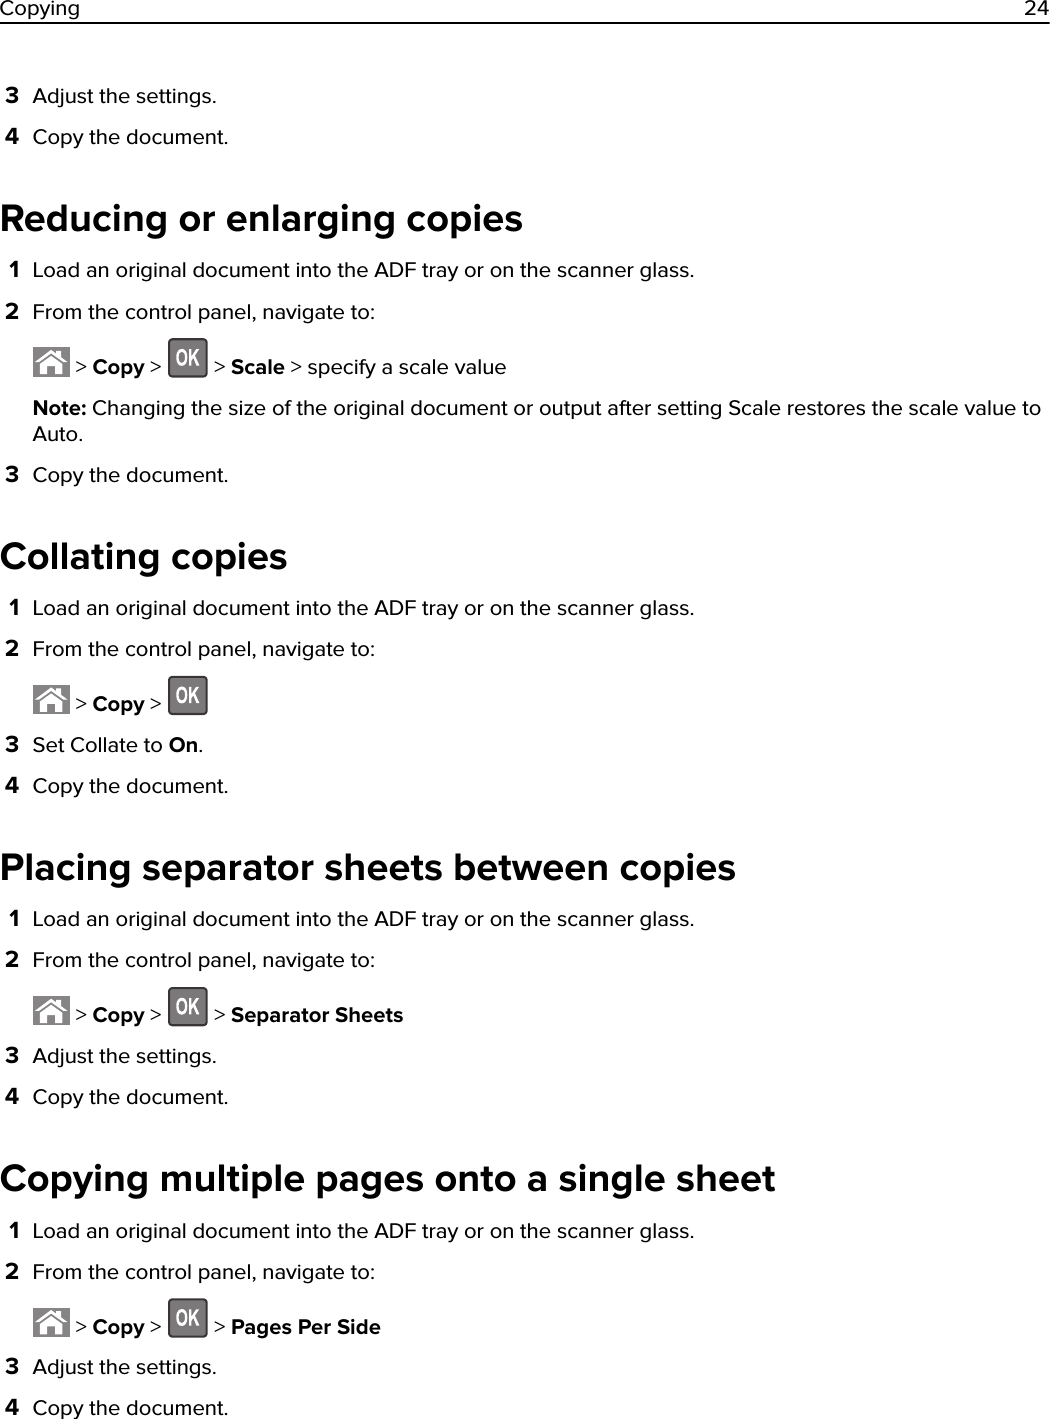 3Adjust the settings.4Copy the document.Reducing or enlarging copies1Load an original document into the ADF tray or on the scanner glass.2From the control panel, navigate to: &gt; Copy &gt;   &gt; Scale &gt; specify a scale valueNote: Changing the size of the original document or output after setting Scale restores the scale value toAuto.3Copy the document.Collating copies1Load an original document into the ADF tray or on the scanner glass.2From the control panel, navigate to: &gt; Copy &gt; 3Set Collate to On.4Copy the document.Placing separator sheets between copies1Load an original document into the ADF tray or on the scanner glass.2From the control panel, navigate to: &gt; Copy &gt;   &gt; Separator Sheets3Adjust the settings.4Copy the document.Copying multiple pages onto a single sheet1Load an original document into the ADF tray or on the scanner glass.2From the control panel, navigate to: &gt; Copy &gt;   &gt; Pages Per Side3Adjust the settings.4Copy the document.Copying 24